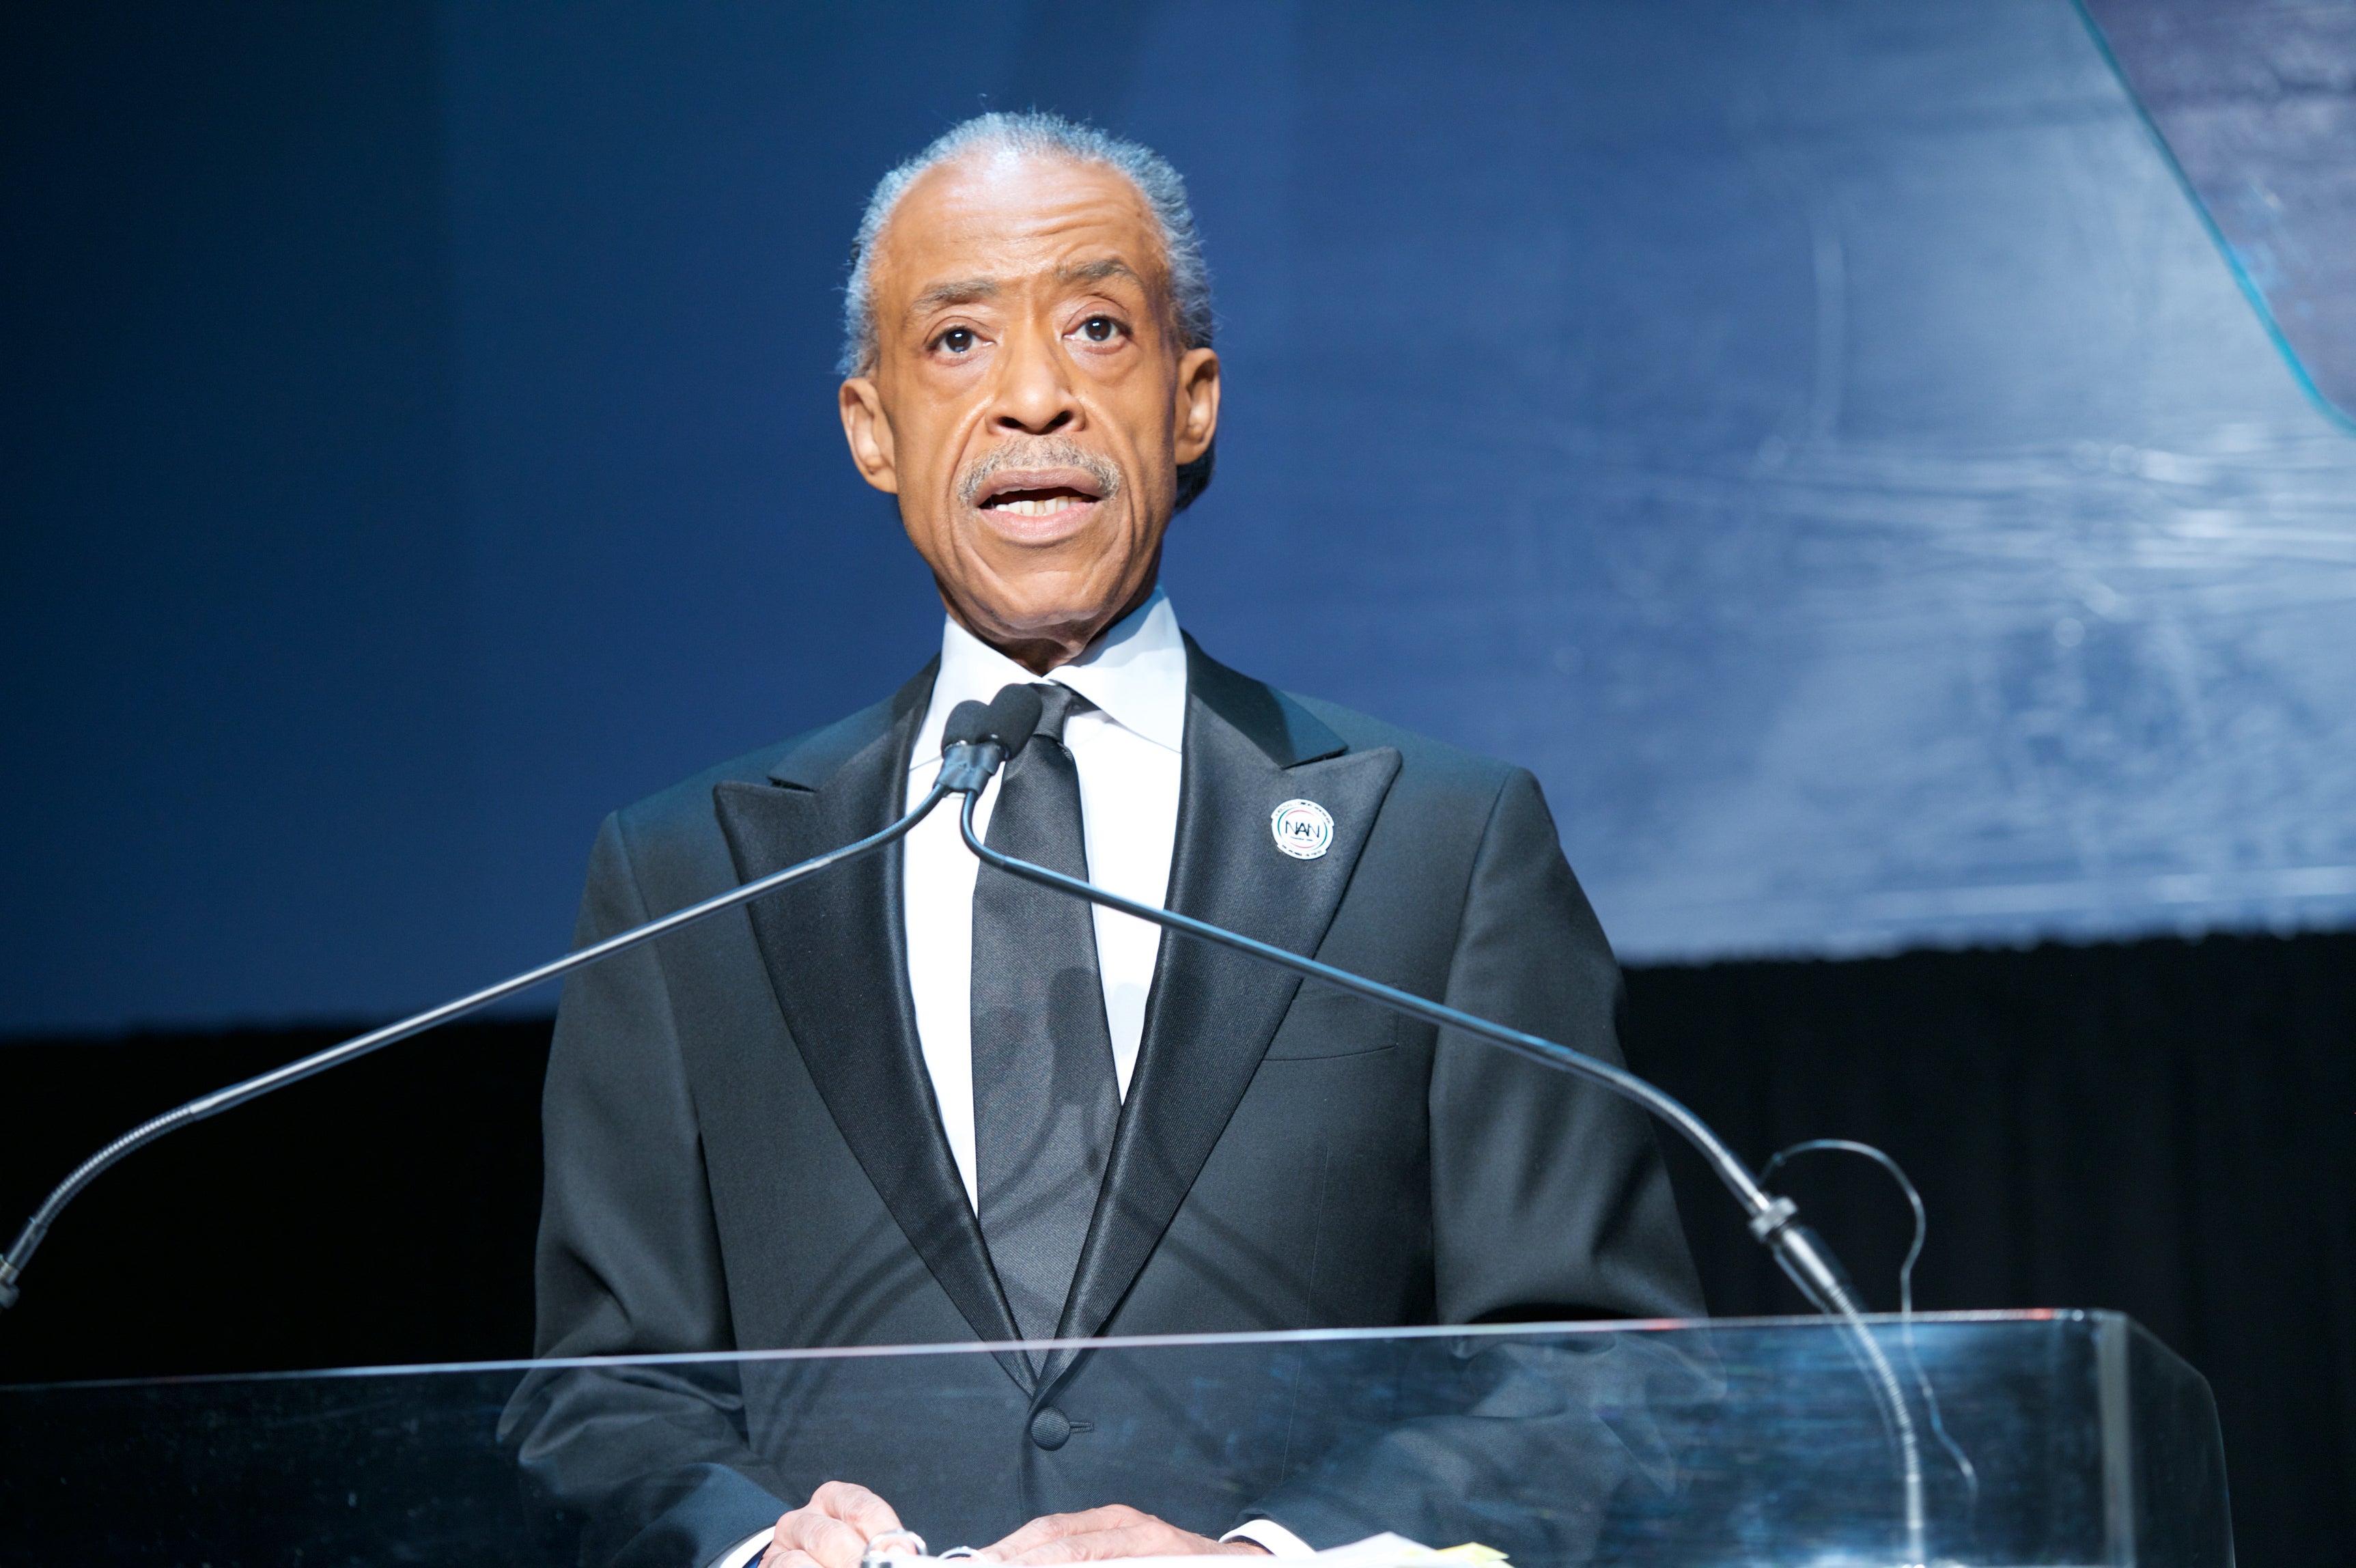 Reverend Al Sharpton Has A Personal Message About His Upcoming Appearance At ESSENCE Fest Durban
